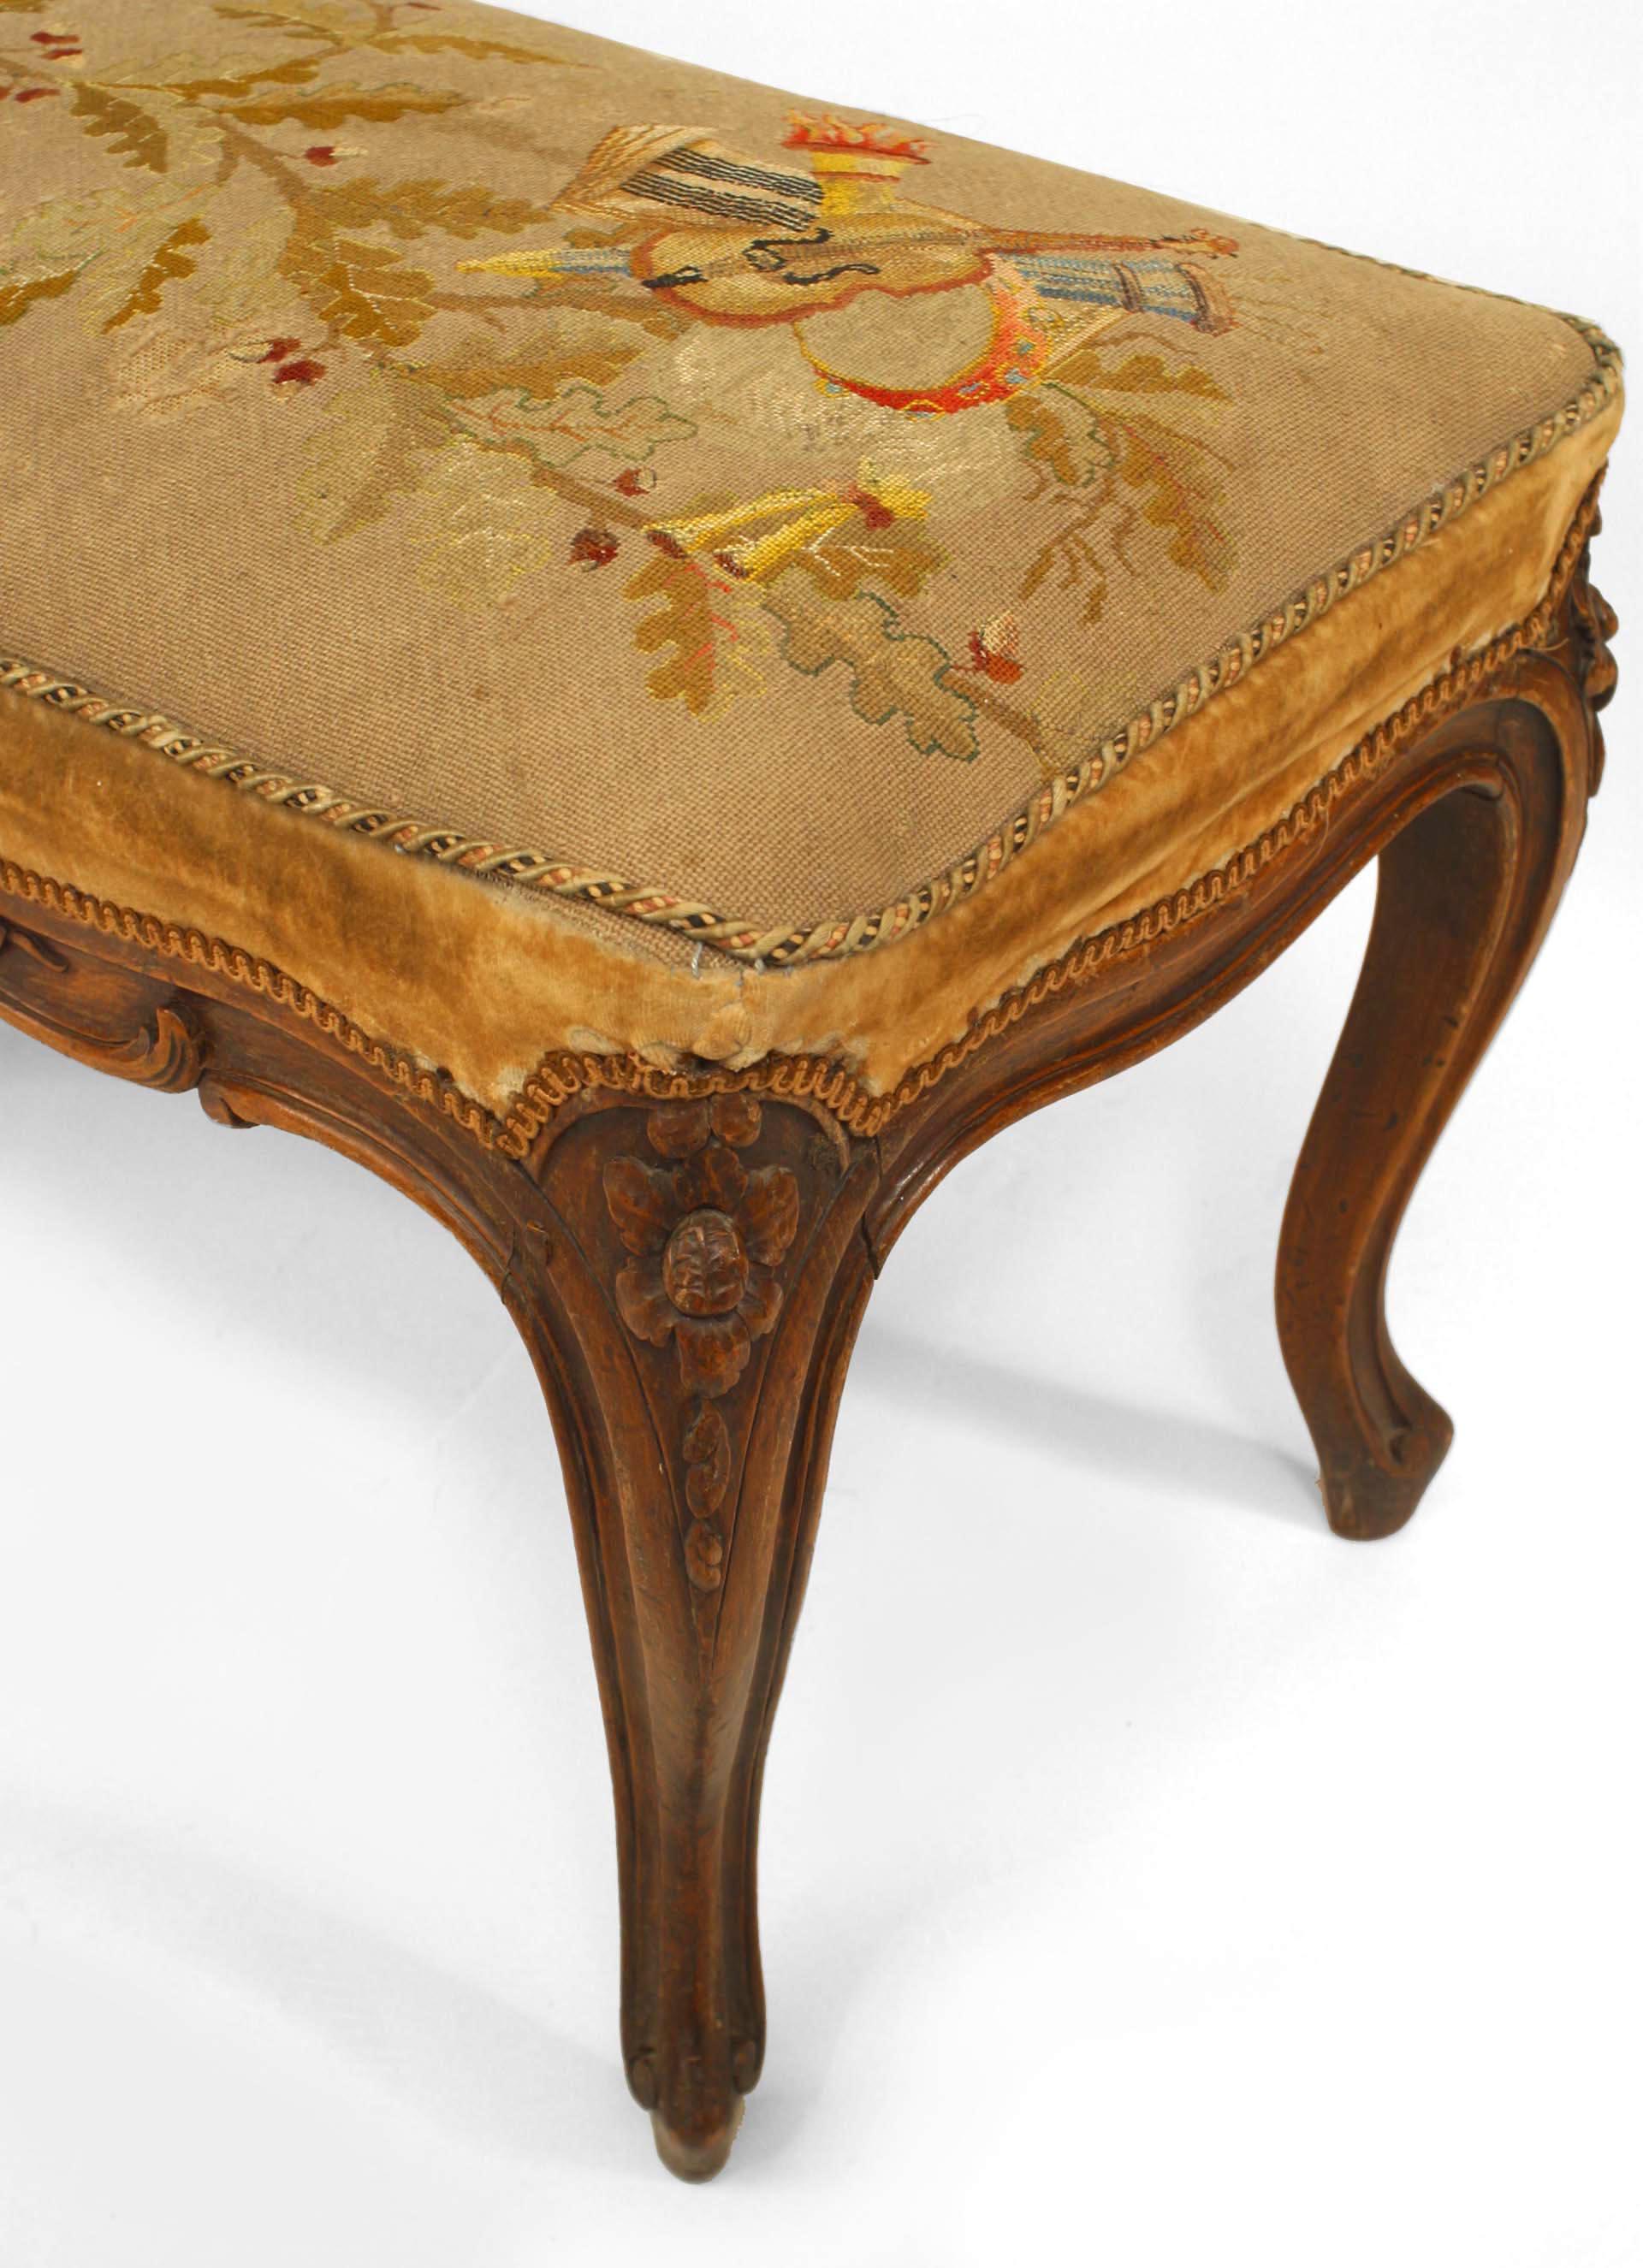 French Louis XV (18th century) narrow walnut carved bench with a tapestry upholstered seat.